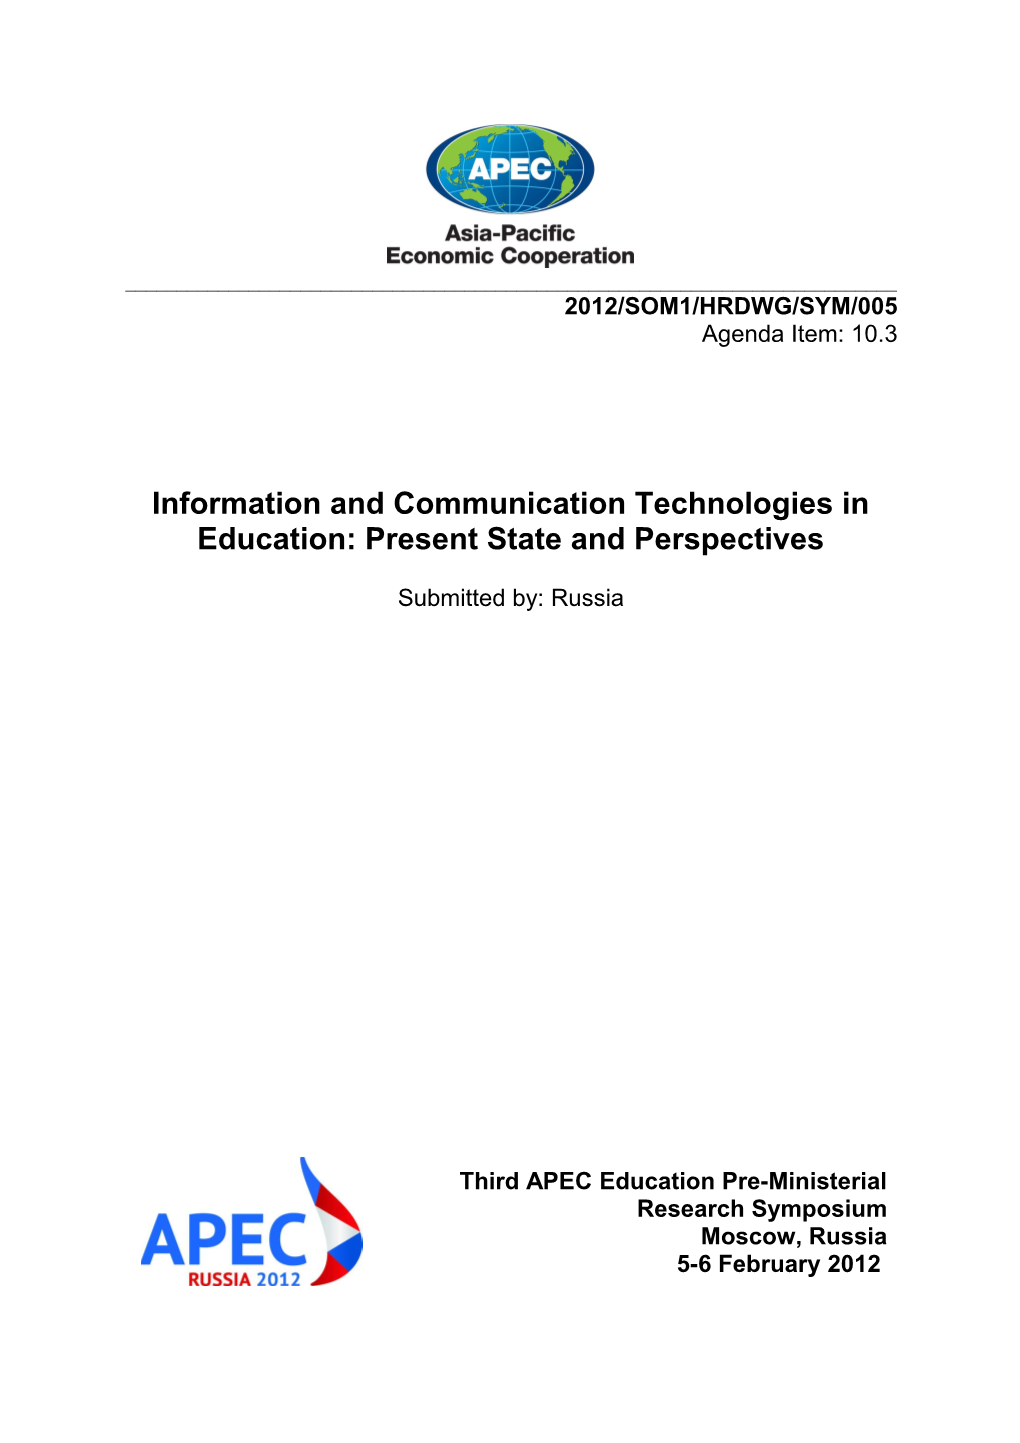 Information and Communication Technologies in Education: Present State and Perspectives